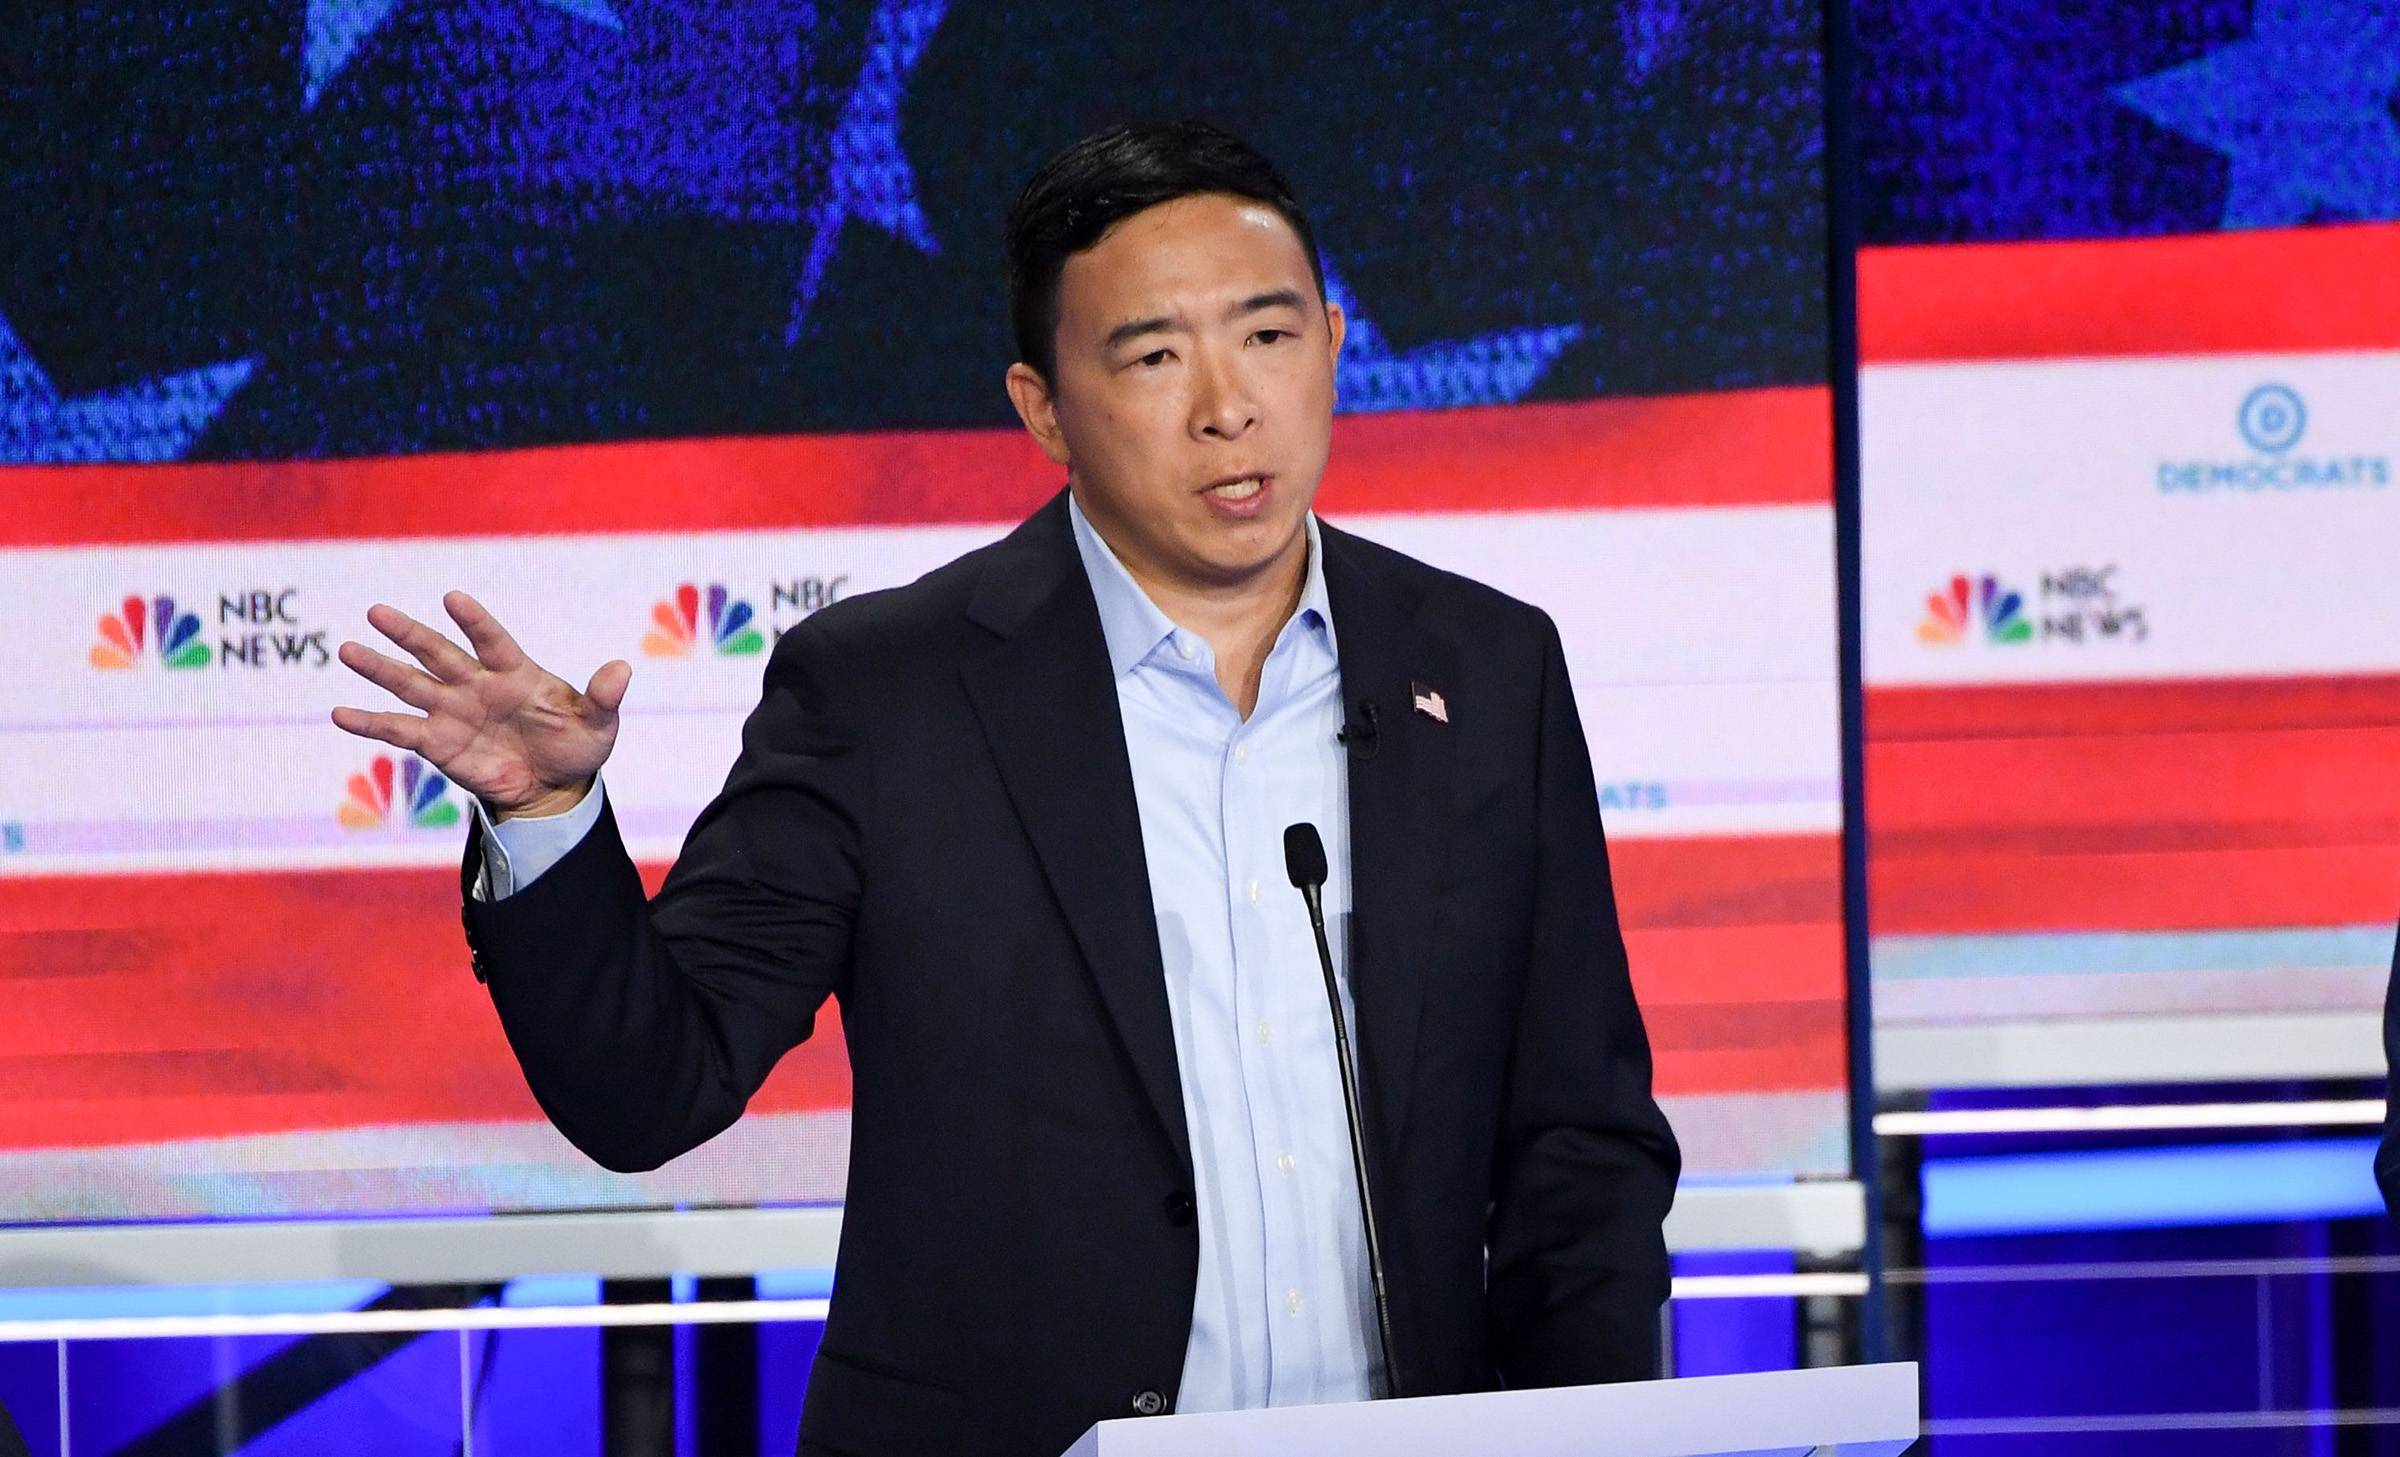 Democratic presidential hopeful US entrepreneur Andrew Yang speaks in the second Democratic primary debate of the 2020 presidential campaign season hosted by NBC News at the Adrienne Arsht Center for the Performing Arts in Miami, Florida, June 27, 2019. (Saul Loeb—AFP/Getty Images)